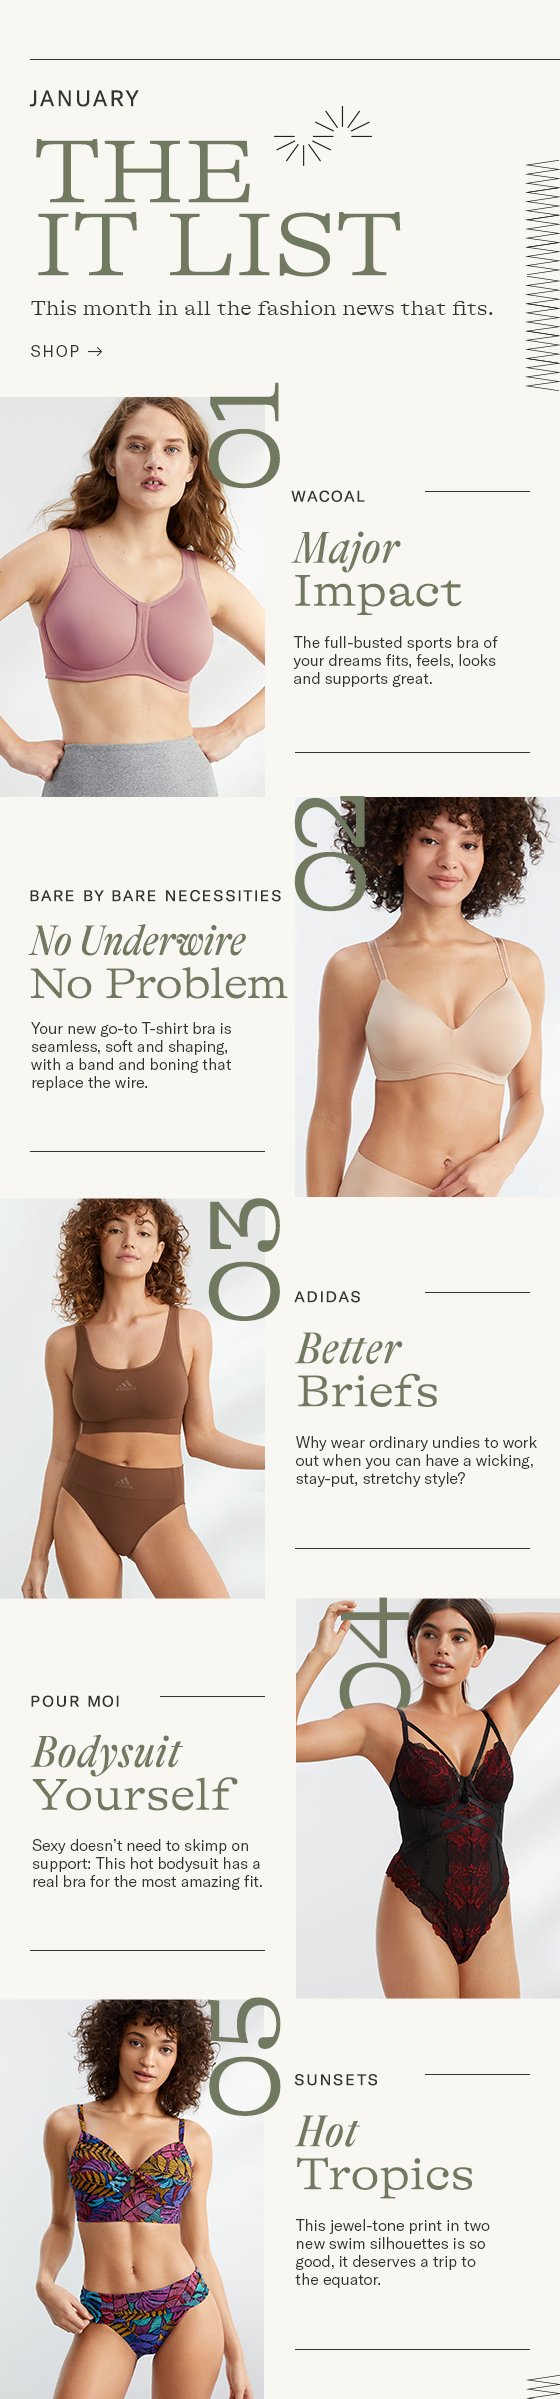  JANUARY THE " IT LIST This month in all the fashion news that fits. Qe J SHOP - WACOAL Major Impact The full-busted sports bra of your dreams fits, feels, looks and supports great. BARE BY BARE NECESSITIES No Underwire No Problem Your new go-to T-shirt bra is seamless, soft and shaping, with a band and boning that replace the wire. , DO Better Briefs Why wear ordinary undies to work out when you can have a wicking, stay-put, stretchy style? POUR MOI Bodysuit Yourself Sexy doesn't need to skimp on support: This hot bodysuit has a real bra for the most amazing fit. SUNSETS Hot Tropics This jewel-tone print in two new swim silhouettes is so good., it deserves a trip to the equator. 